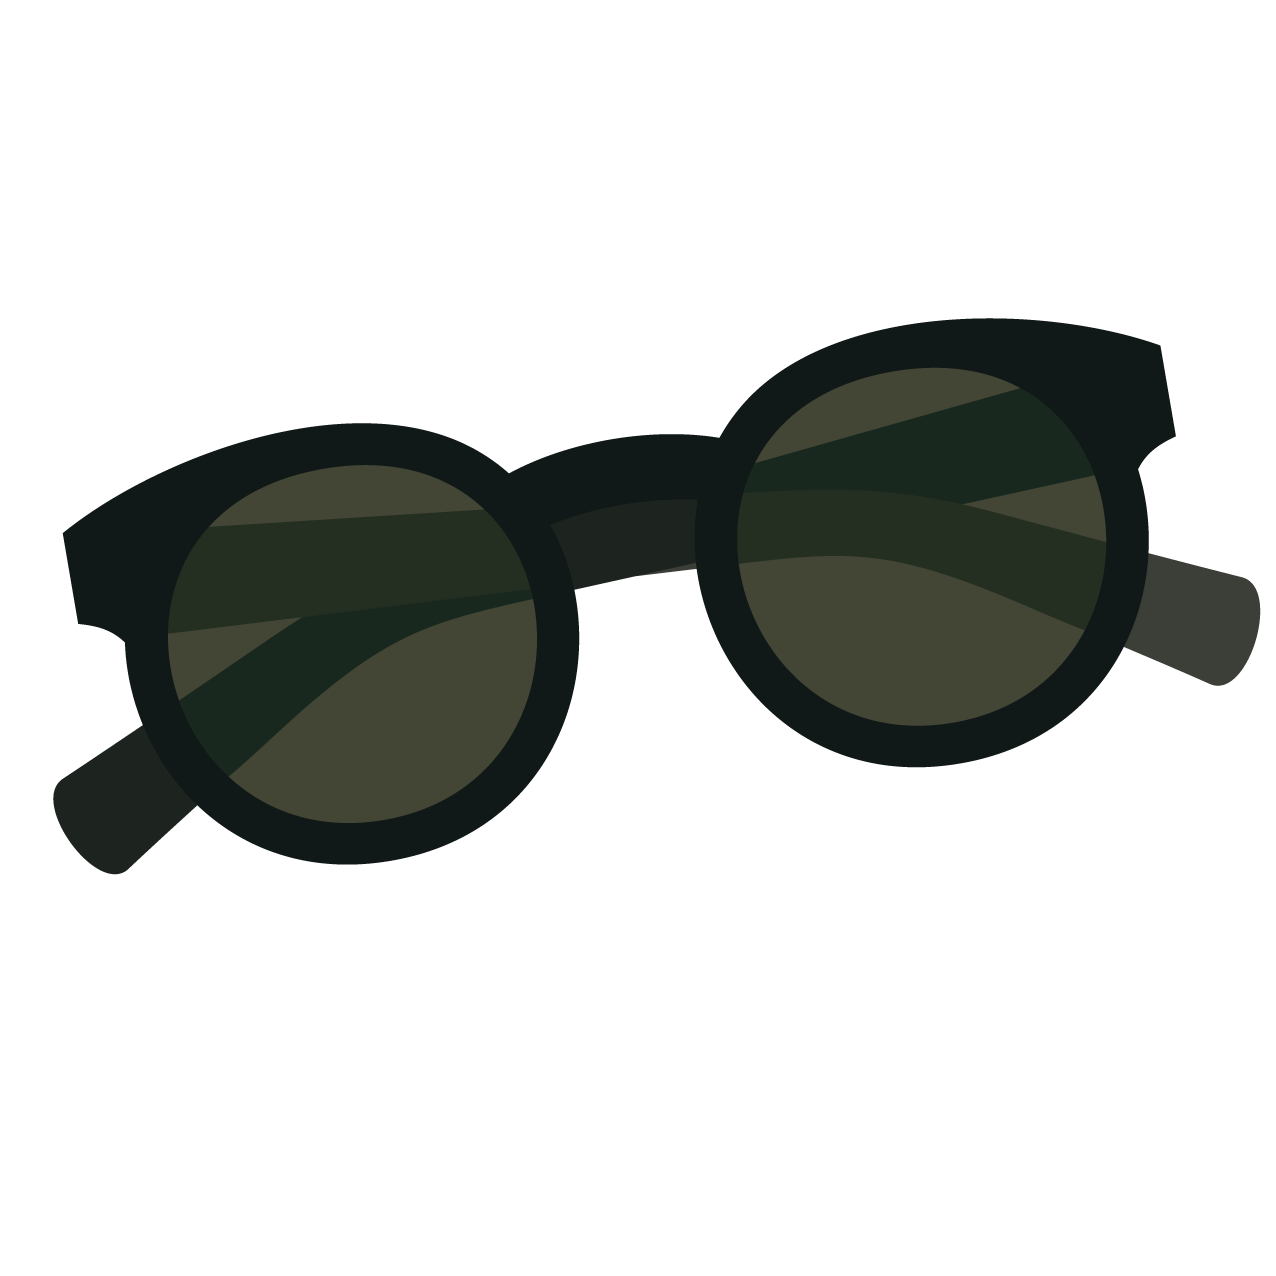 Goggles Sunglasses Beautifully Free Download Image Clipart